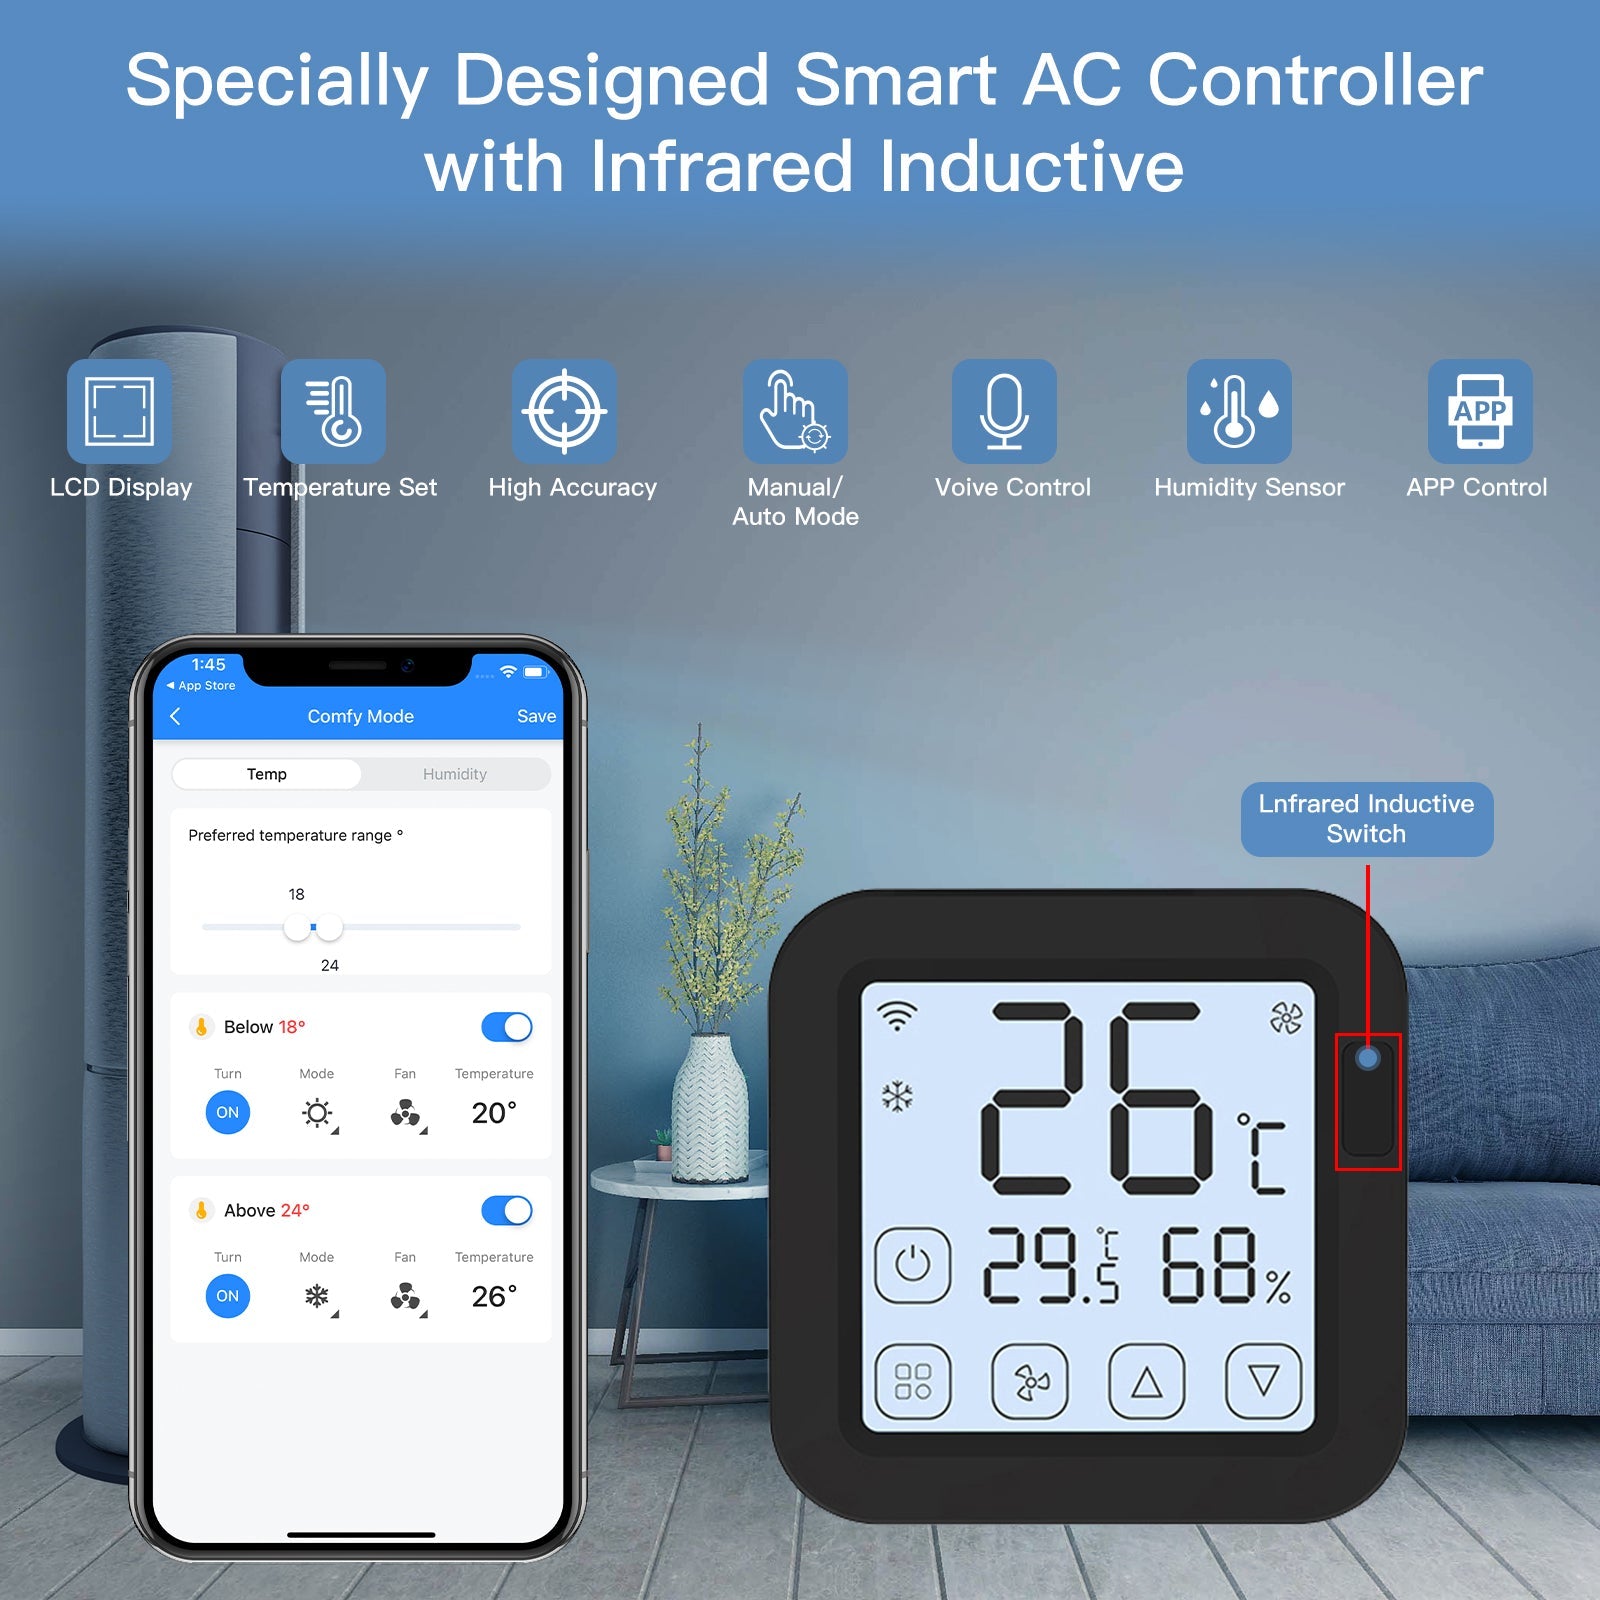 Smart WiF IR Remote Control With Temperature & Humidity Sensor For